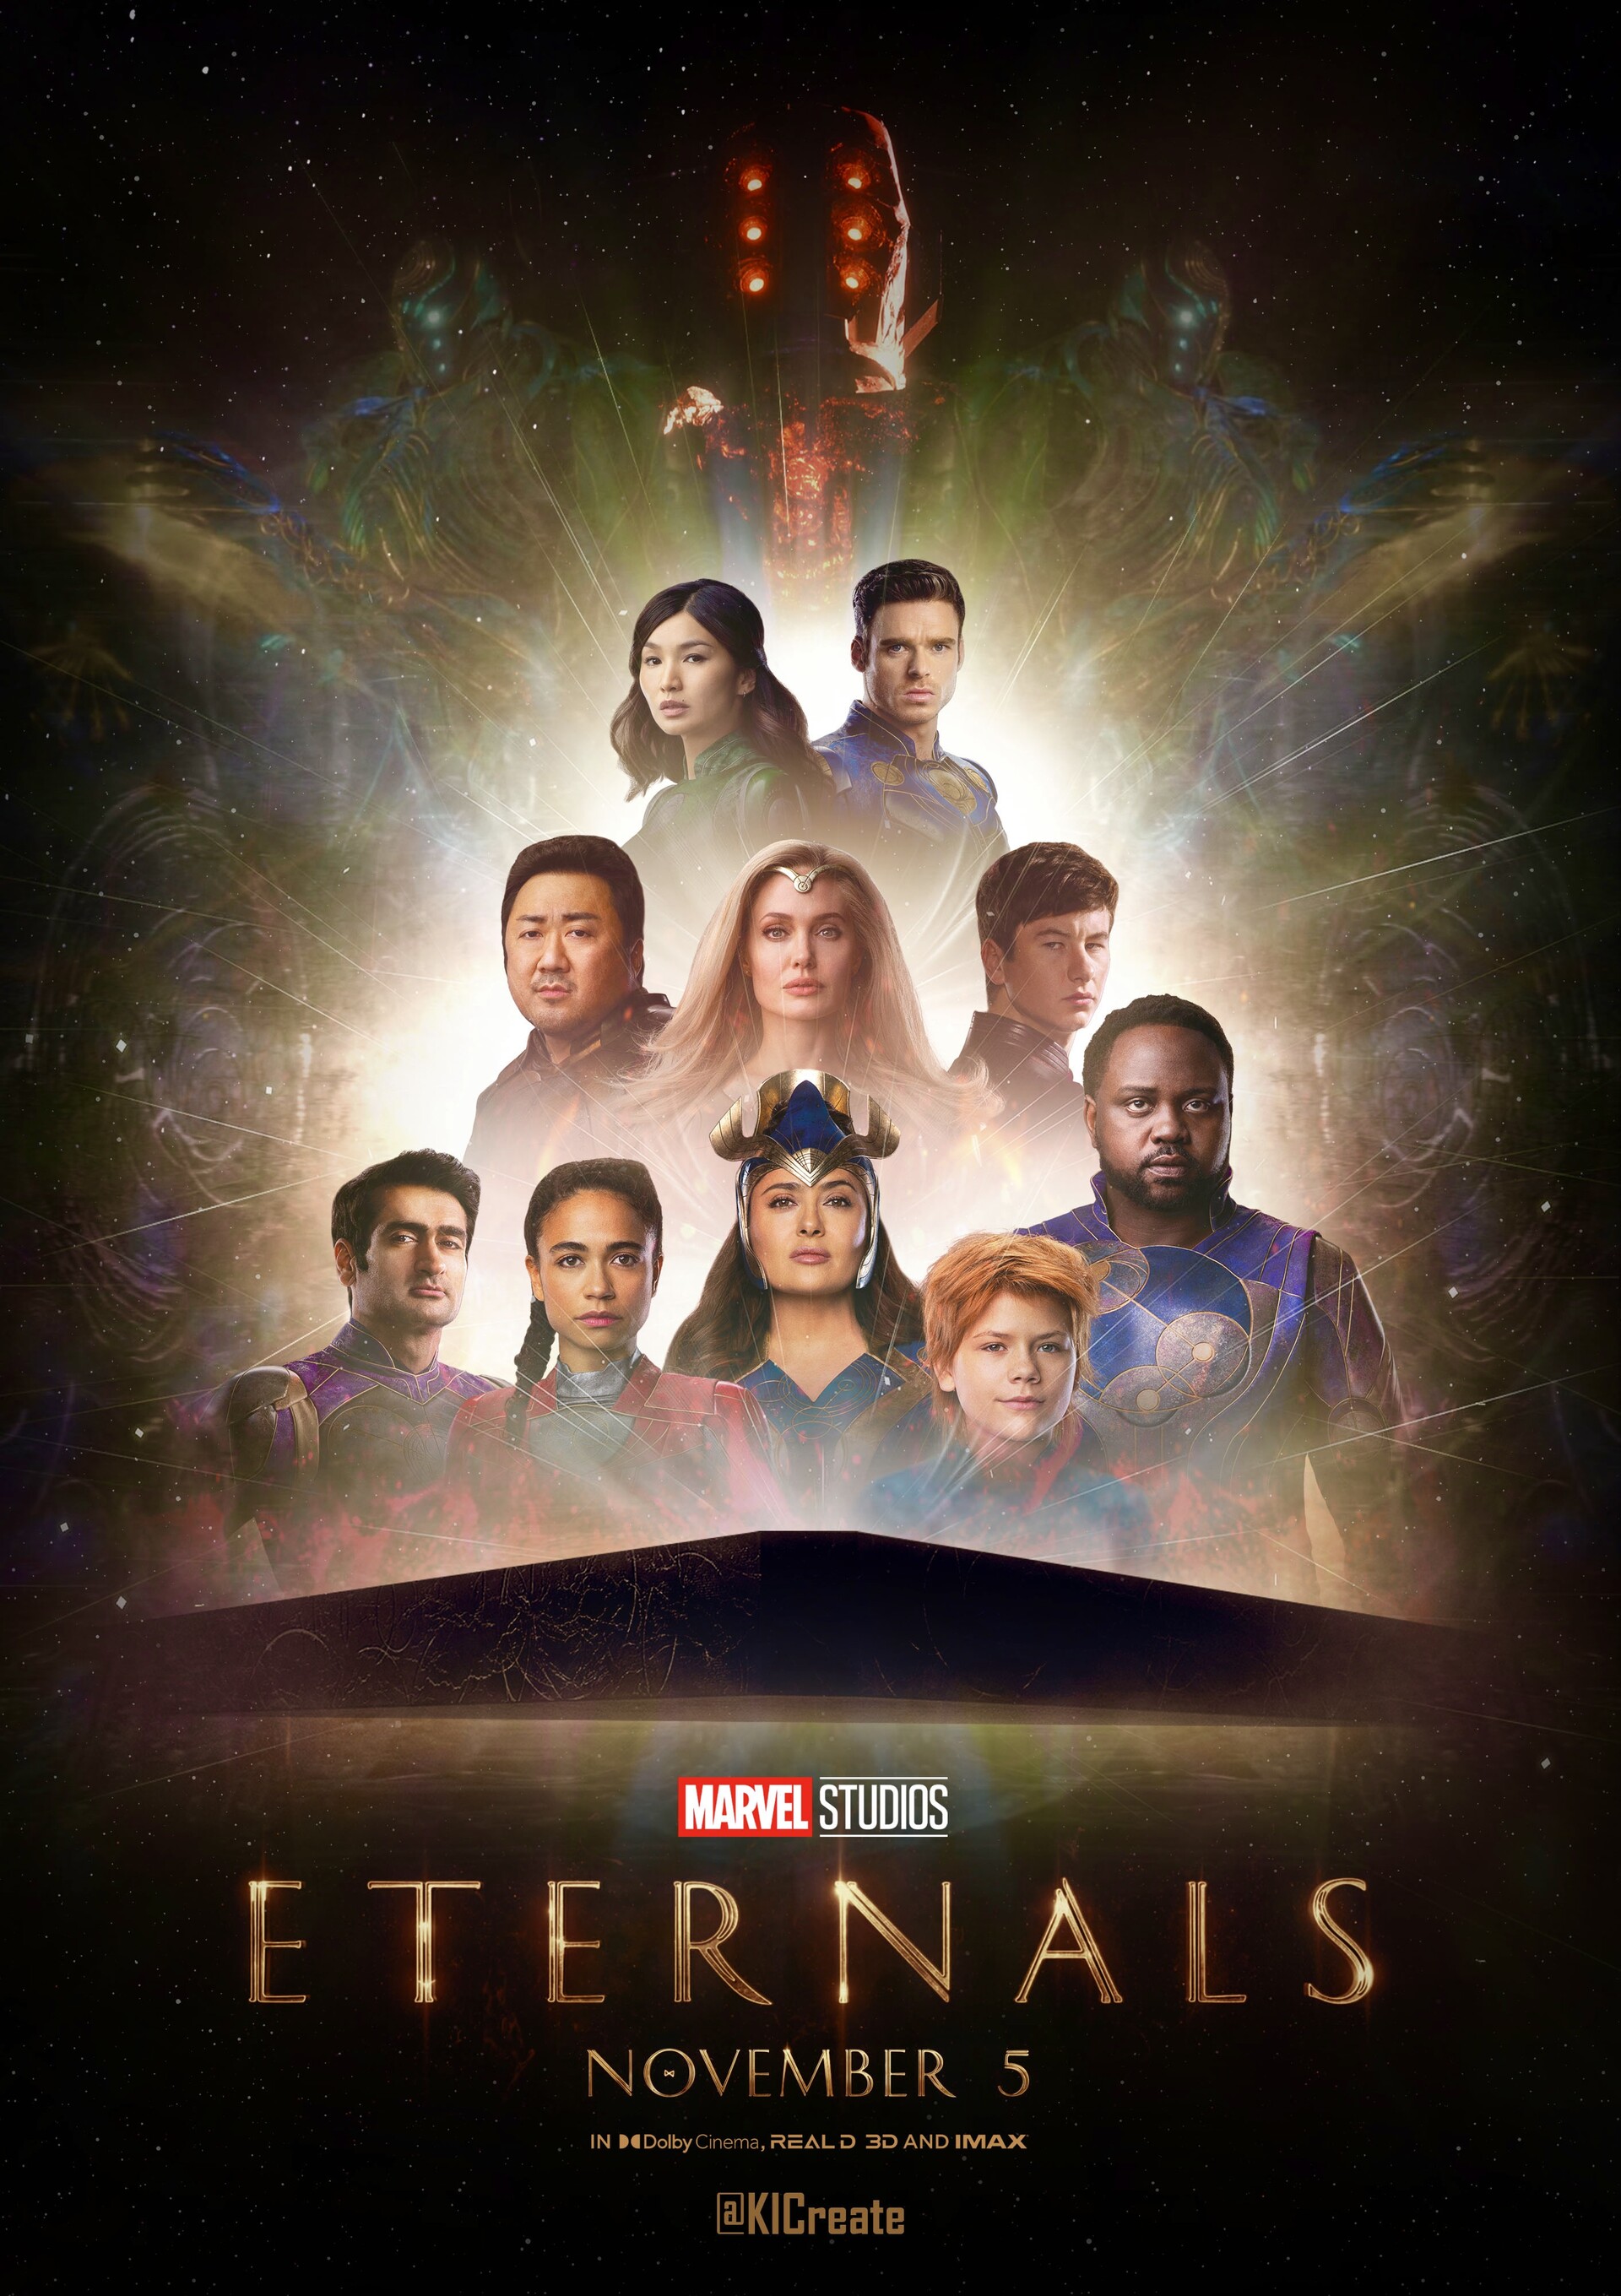 Eternals (2021) English 480p HDRip x264 AAC ESubs [400MB] Full Hollywood Movie